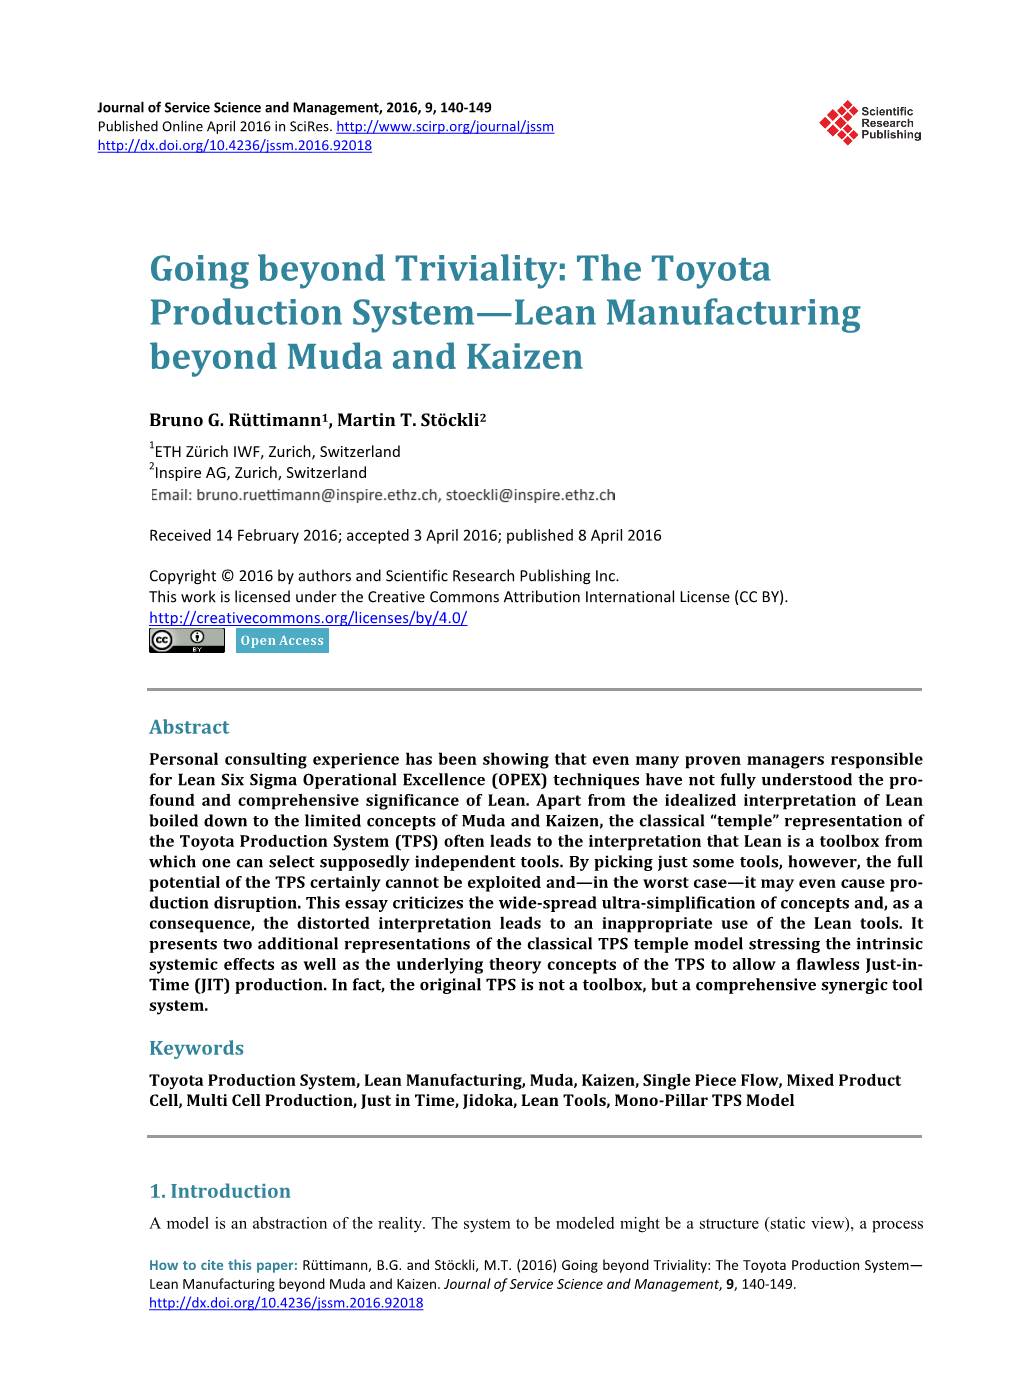 The Toyota Production System—Lean Manufacturing Beyond Muda and Kaizen